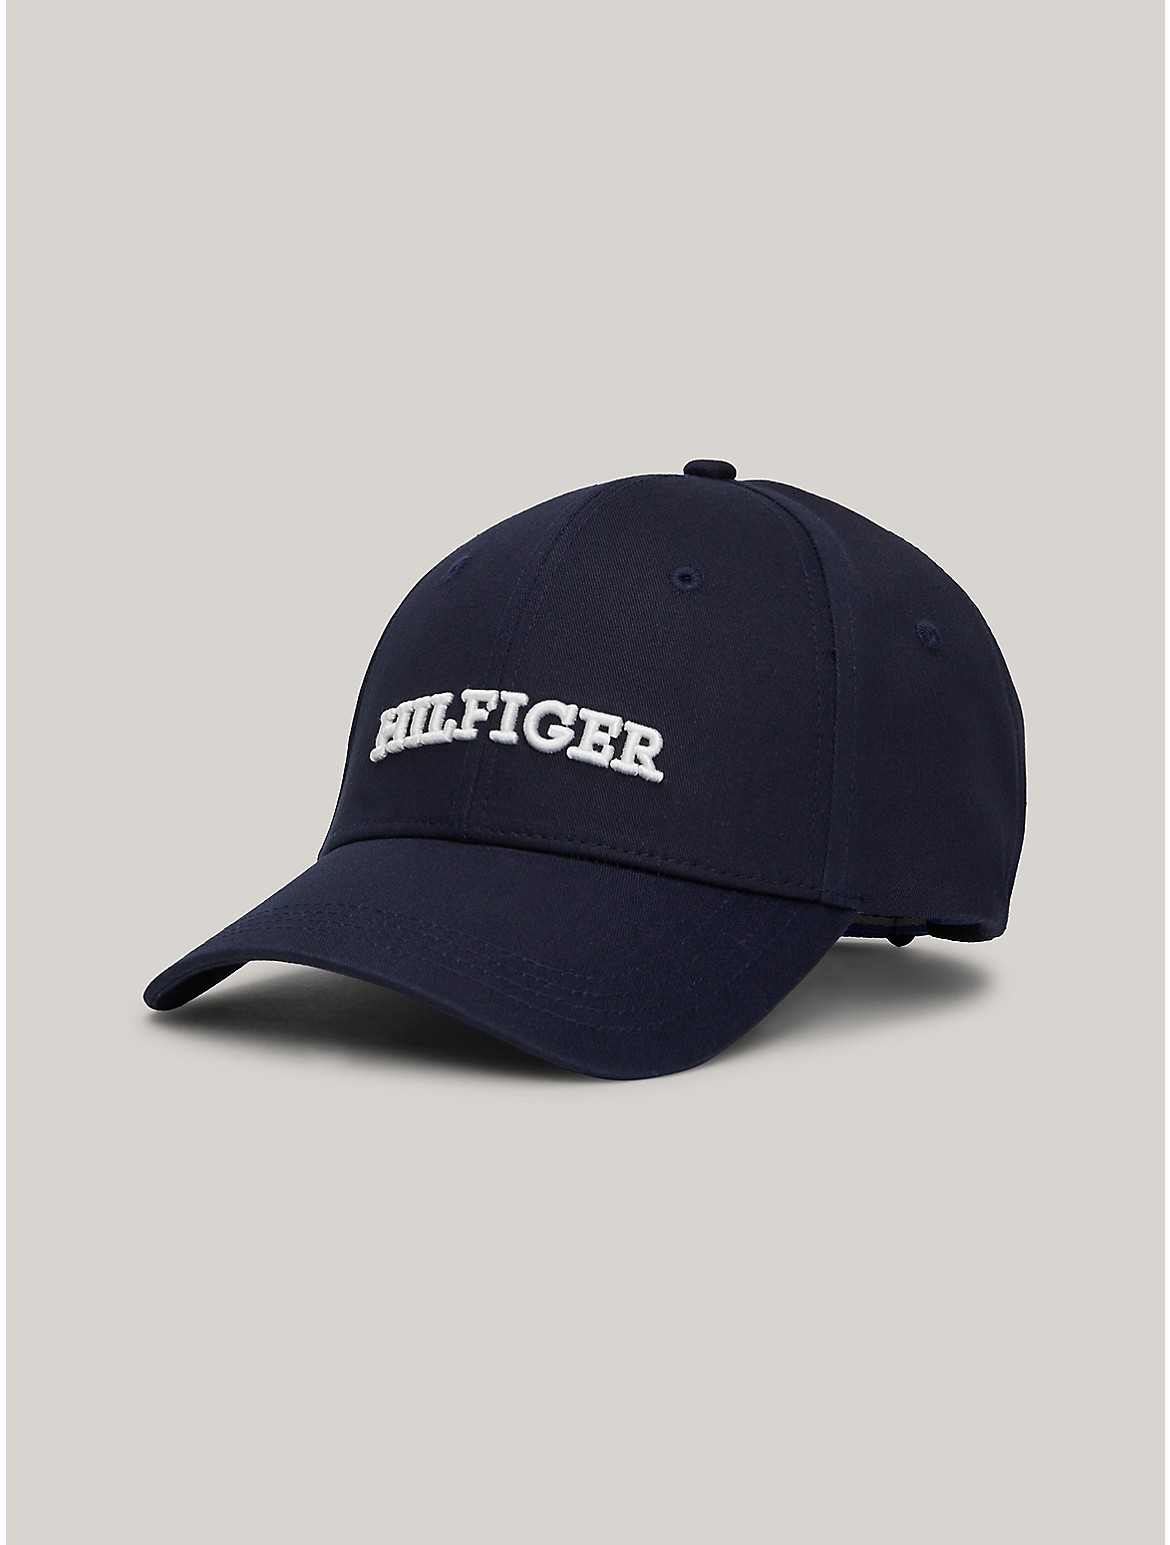 Tommy Hilfiger Women's Embroidered Monotype Cap